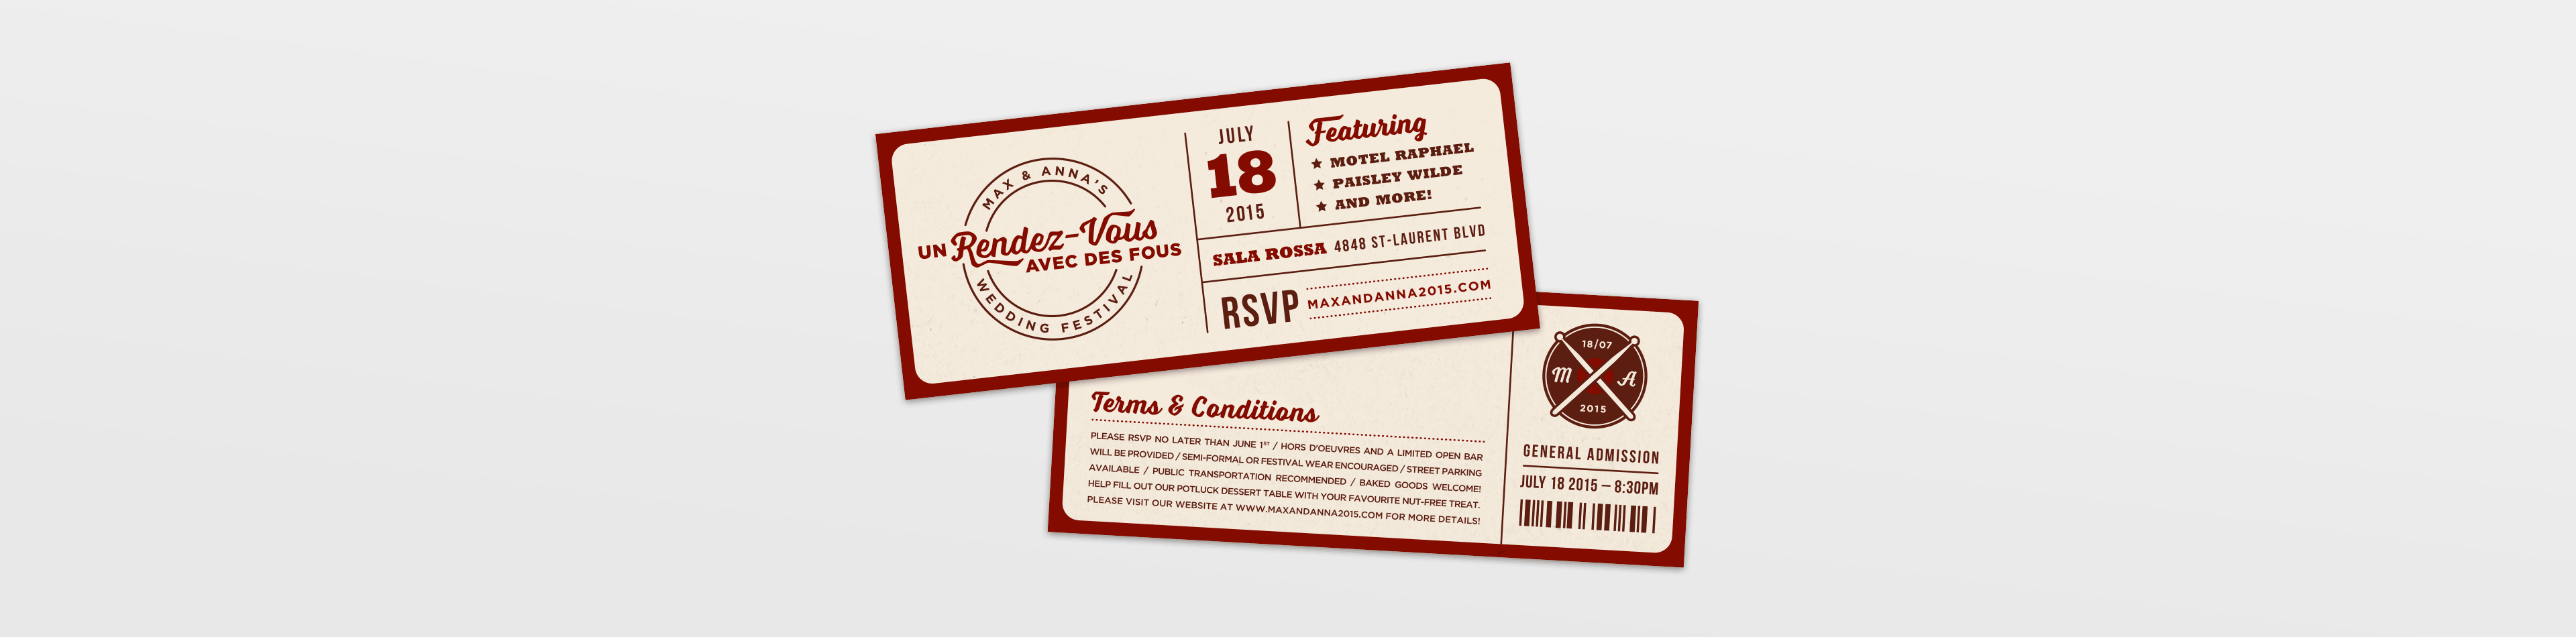 Front and back ticket design for concert-themed wedding invitations